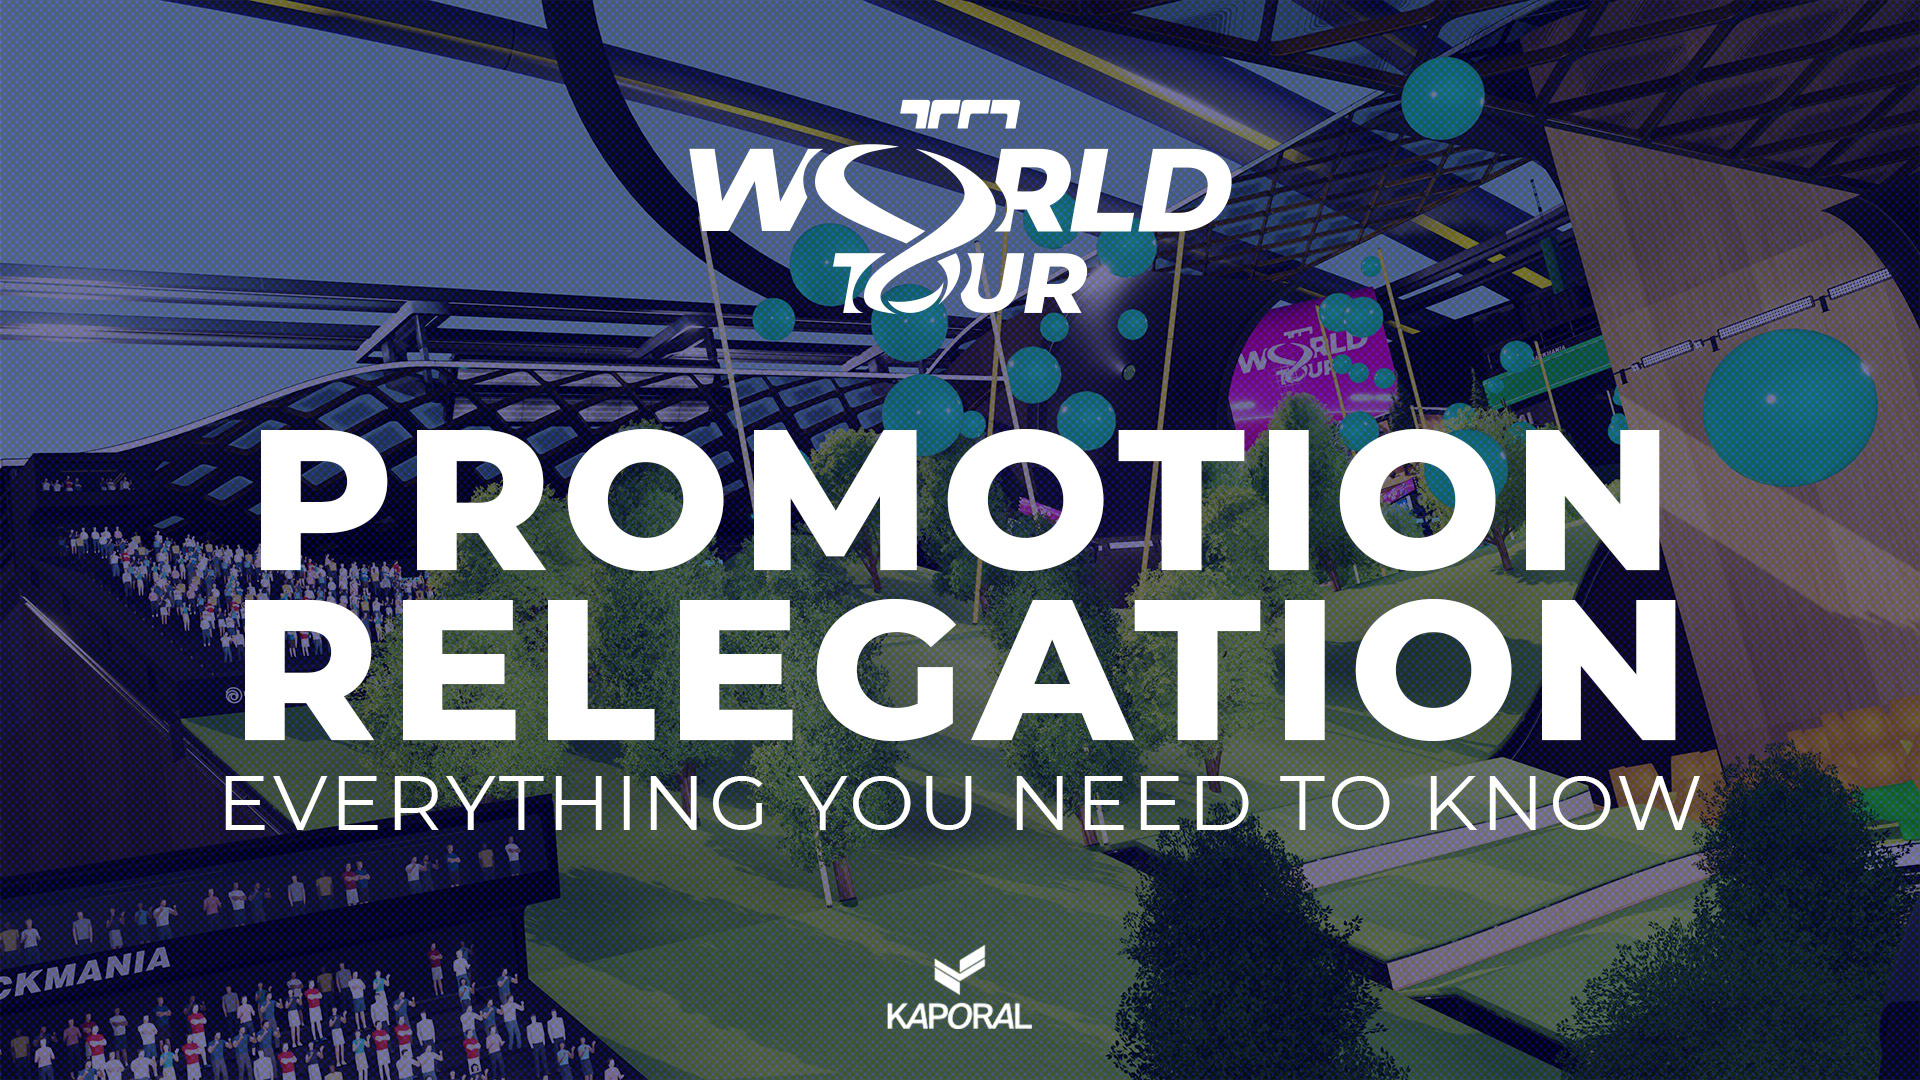 Promotion/Relegation event: everything you need to know